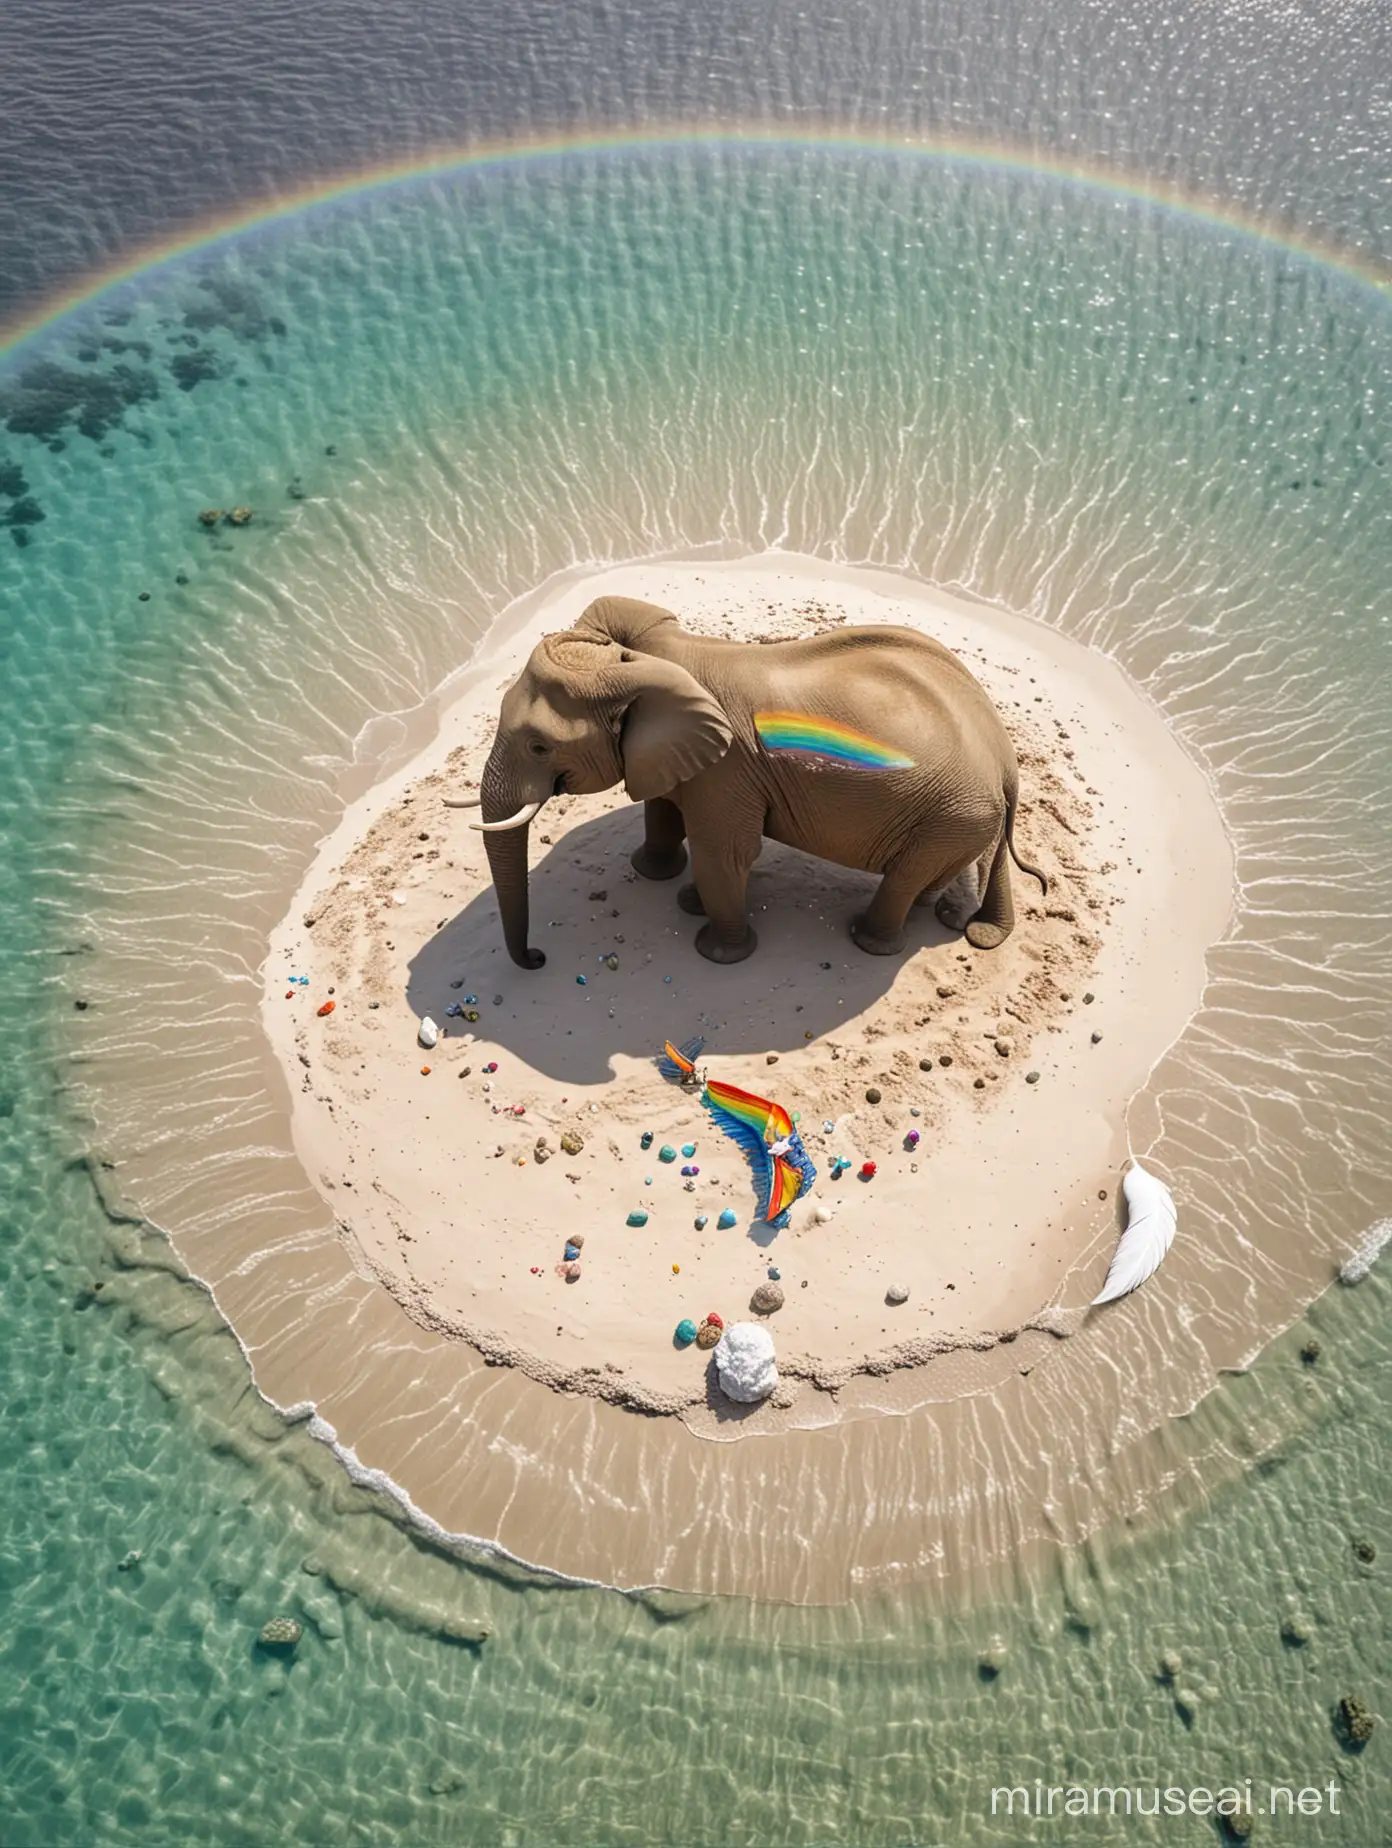 Elephant on Desert Island with Pearl Feather and Rainbow